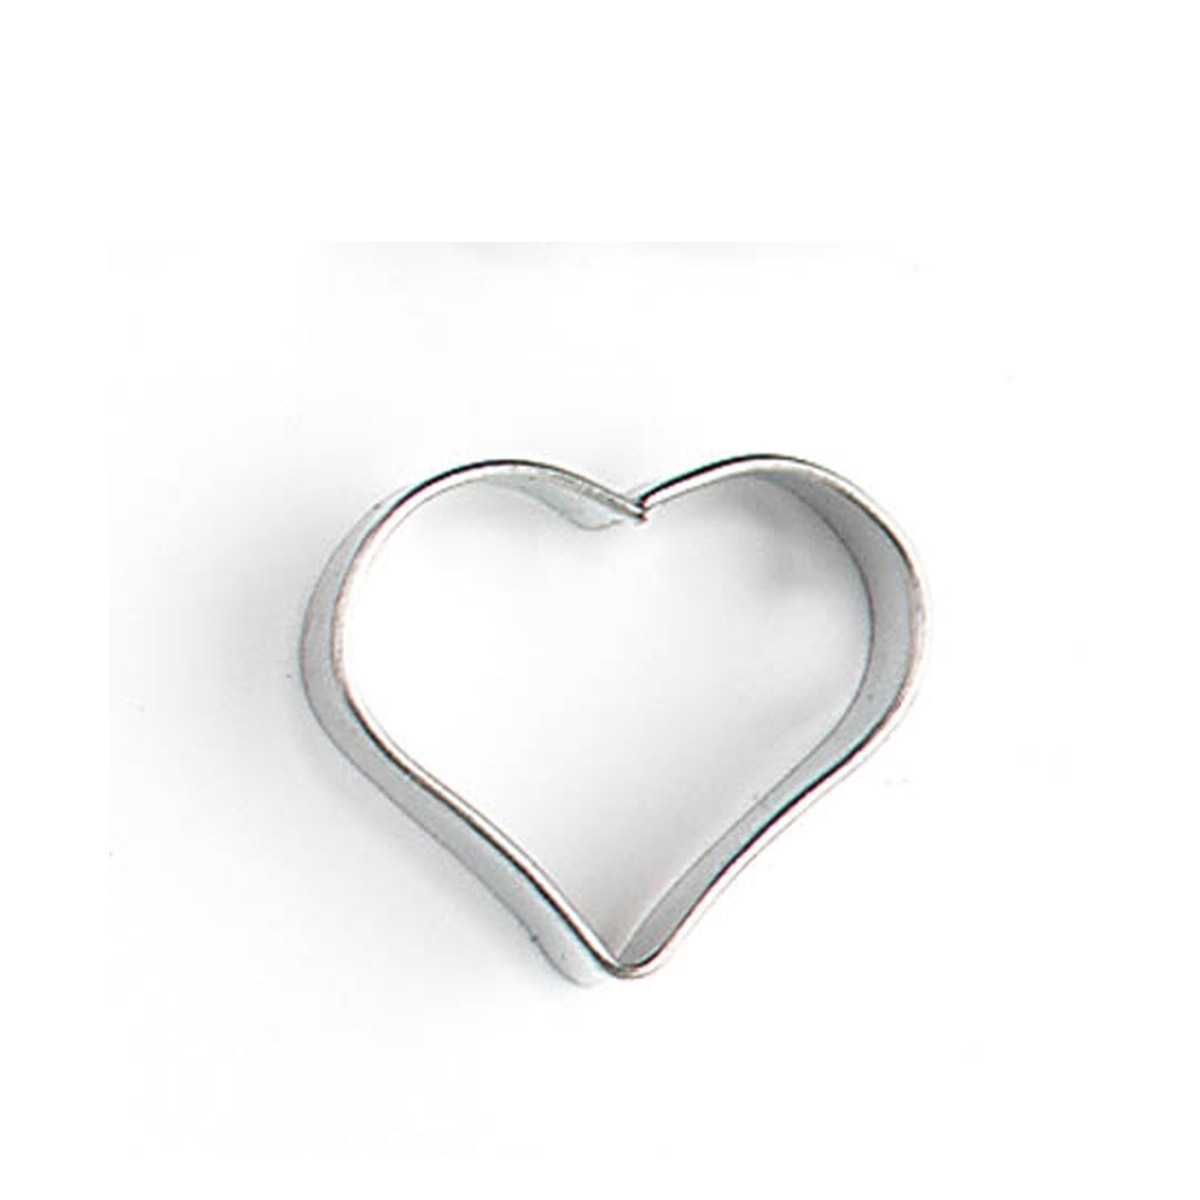 Metal cookie cutter heart | Toy Estate